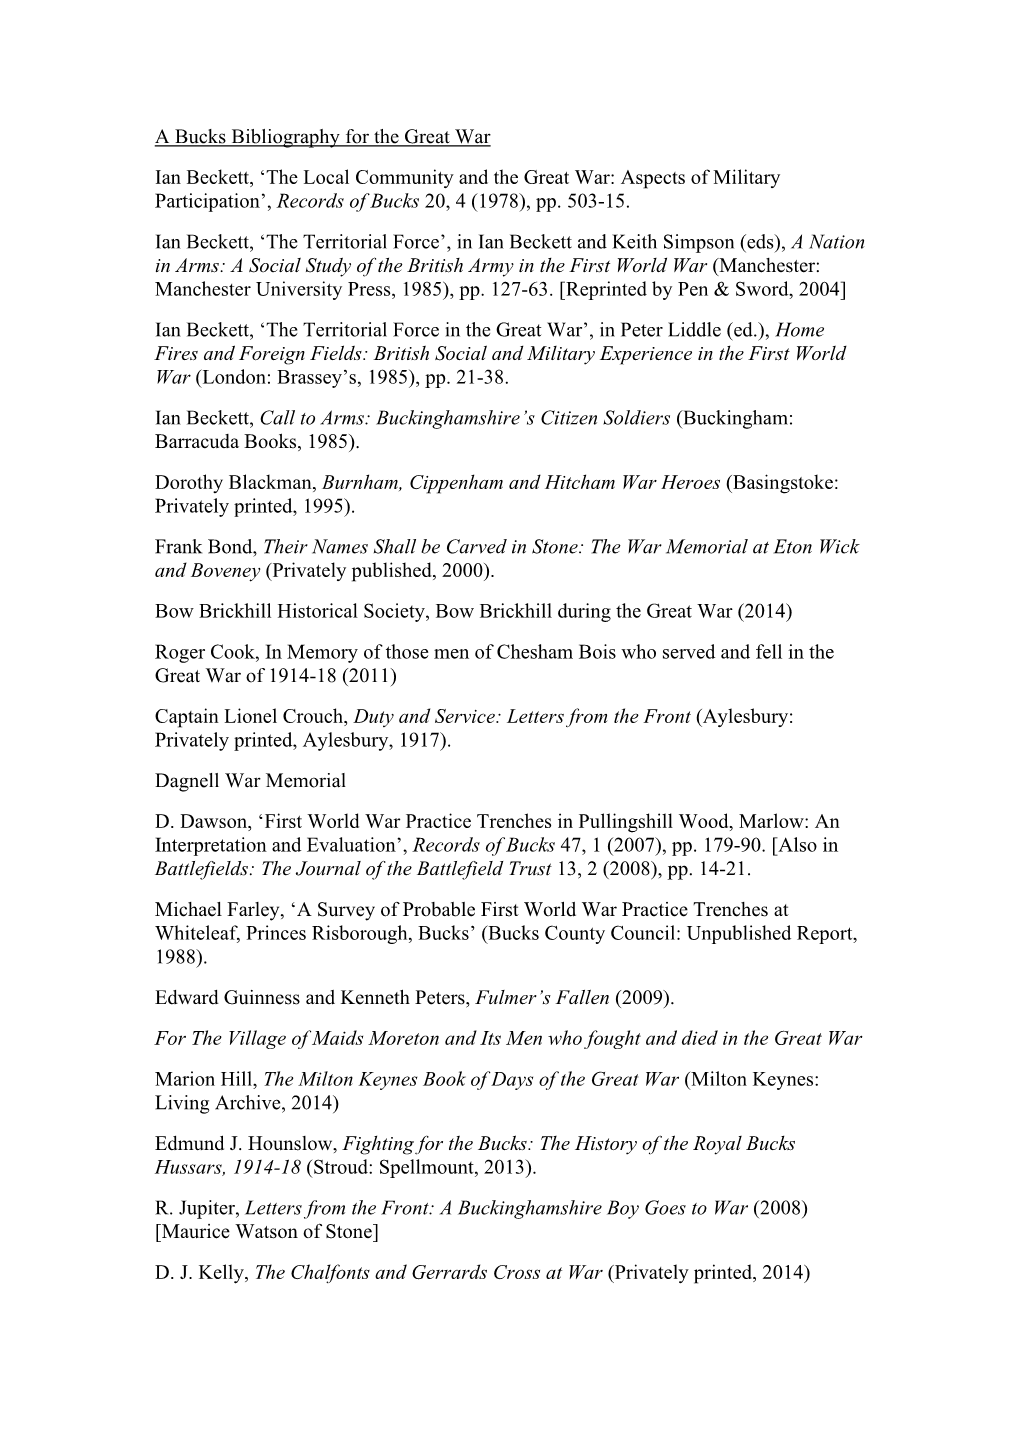 A Bucks Bibliography for the Great War Ian Beckett, ‘The Local Community and the Great War: Aspects of Military Participation’, Records of Bucks 20, 4 (1978), Pp